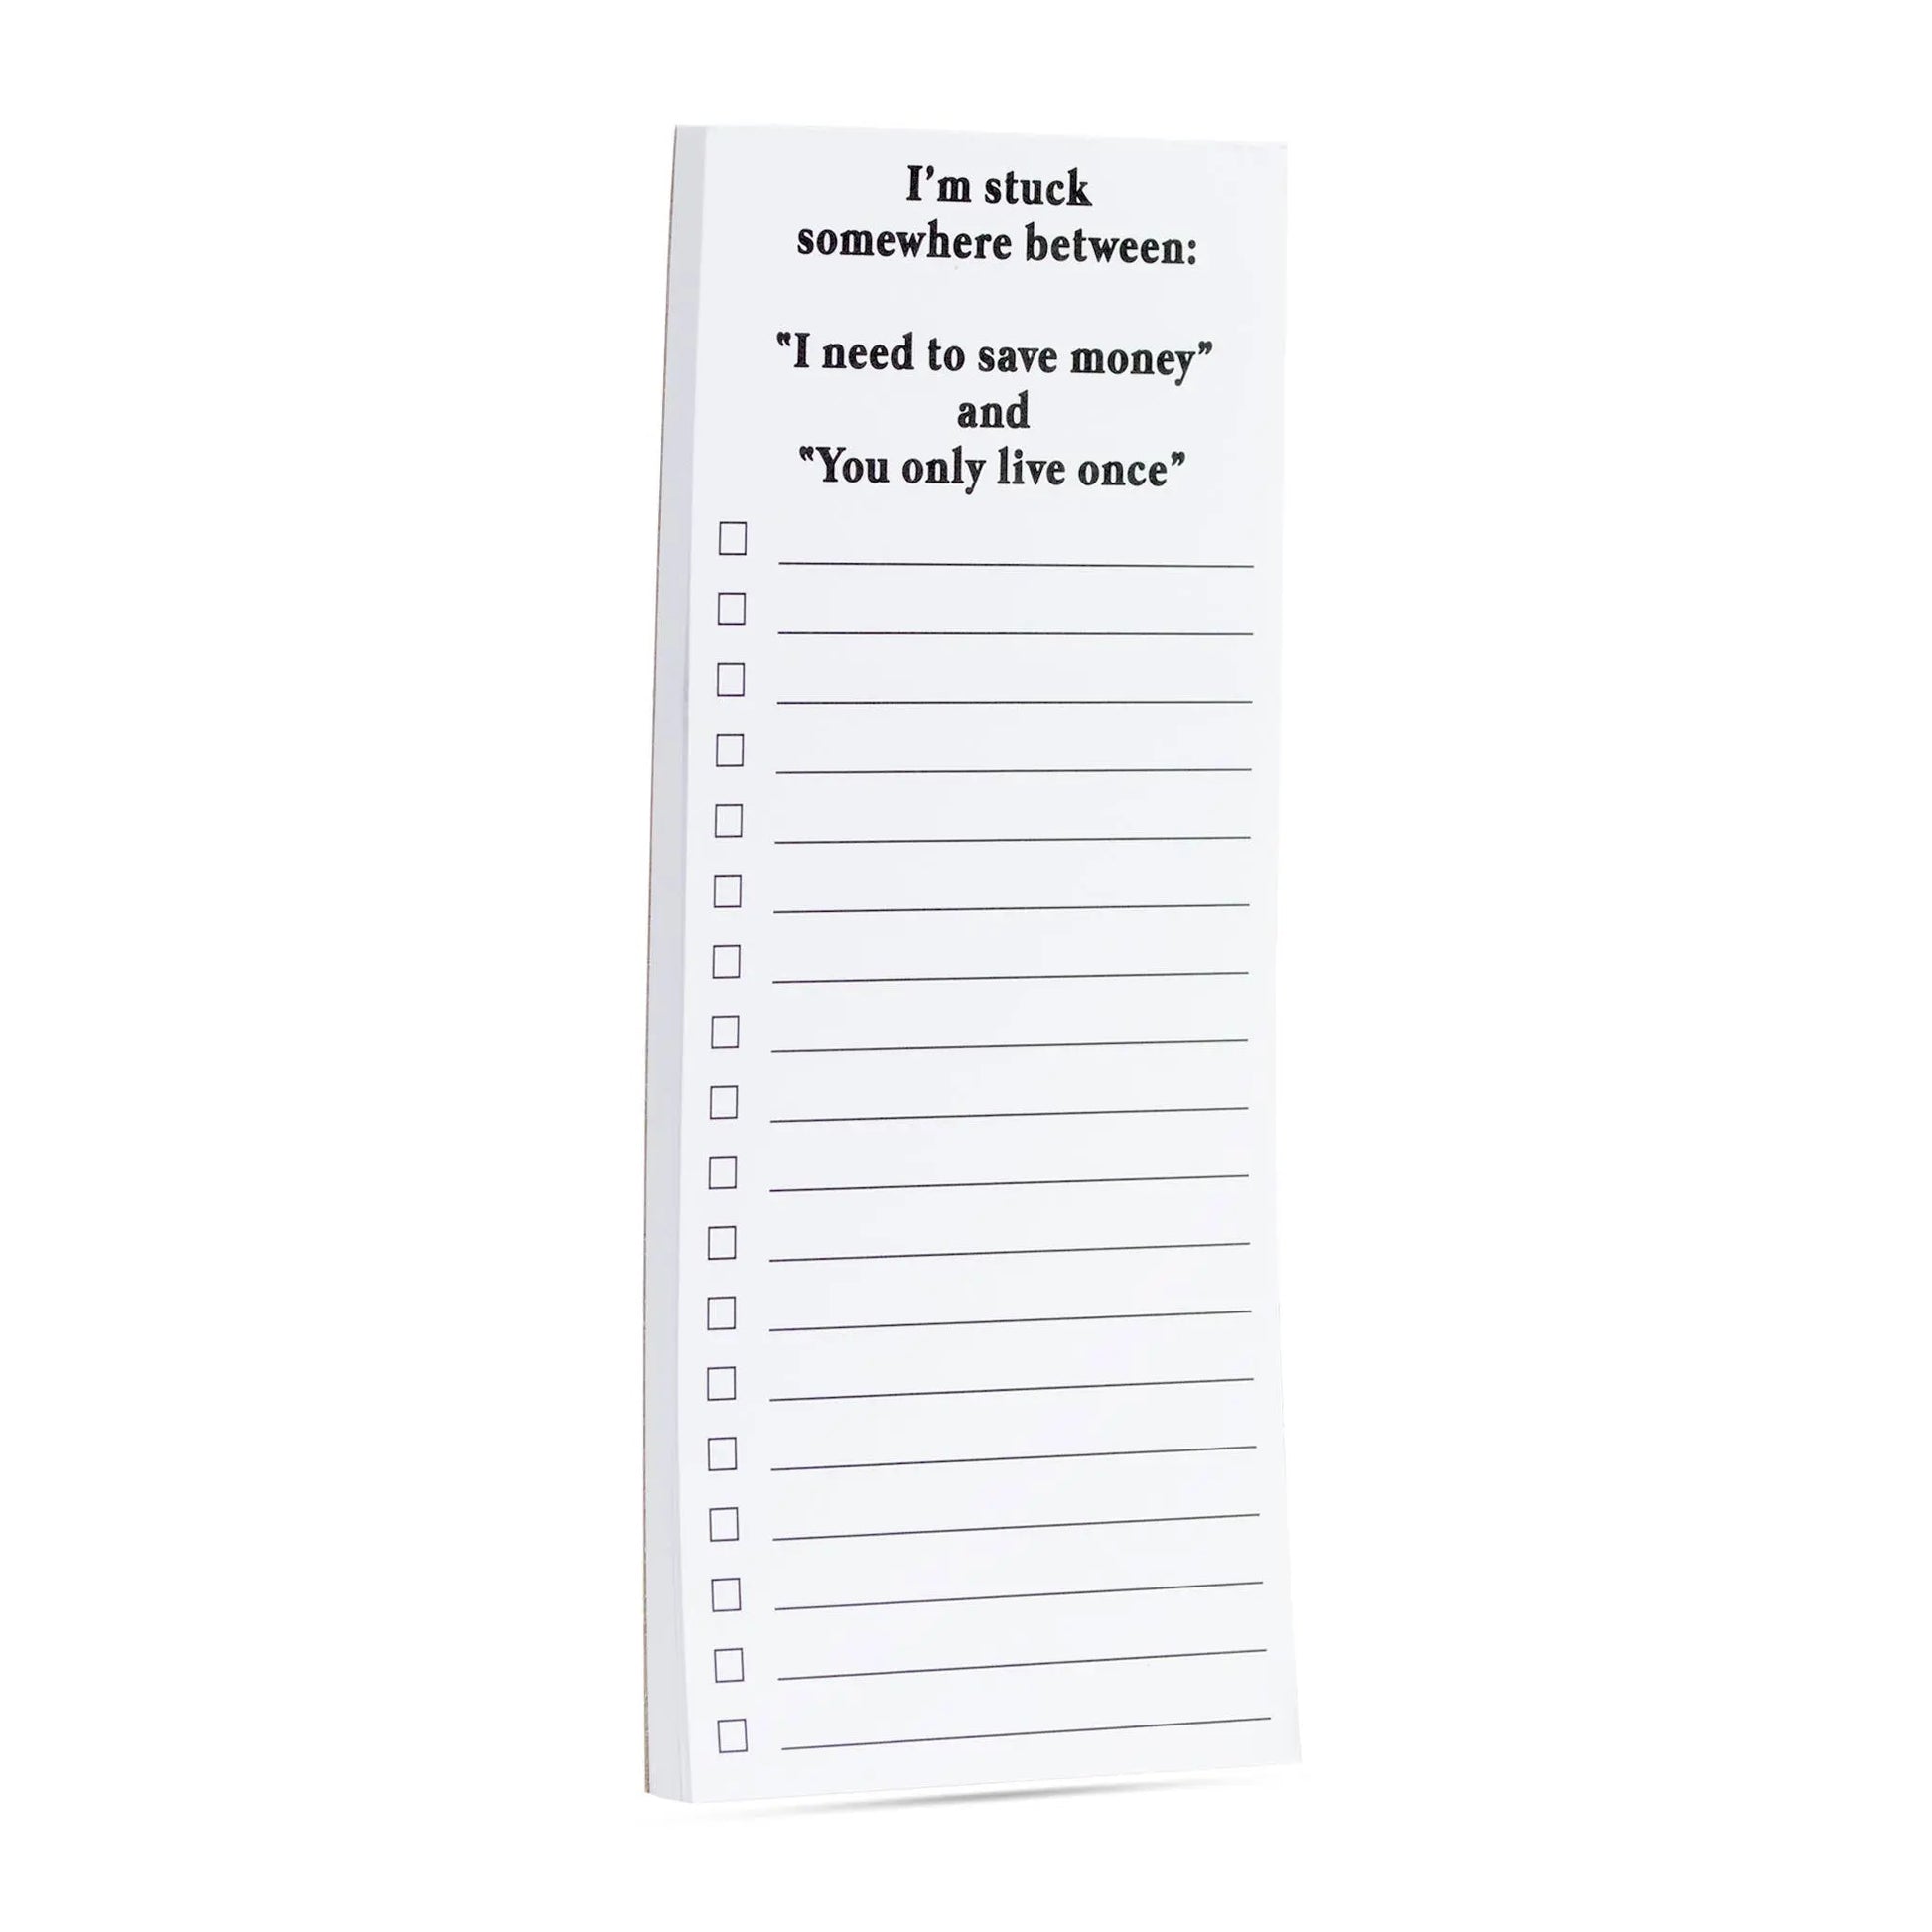 Stuck somewhere between save money & YOLO funny list pad ellembee gift